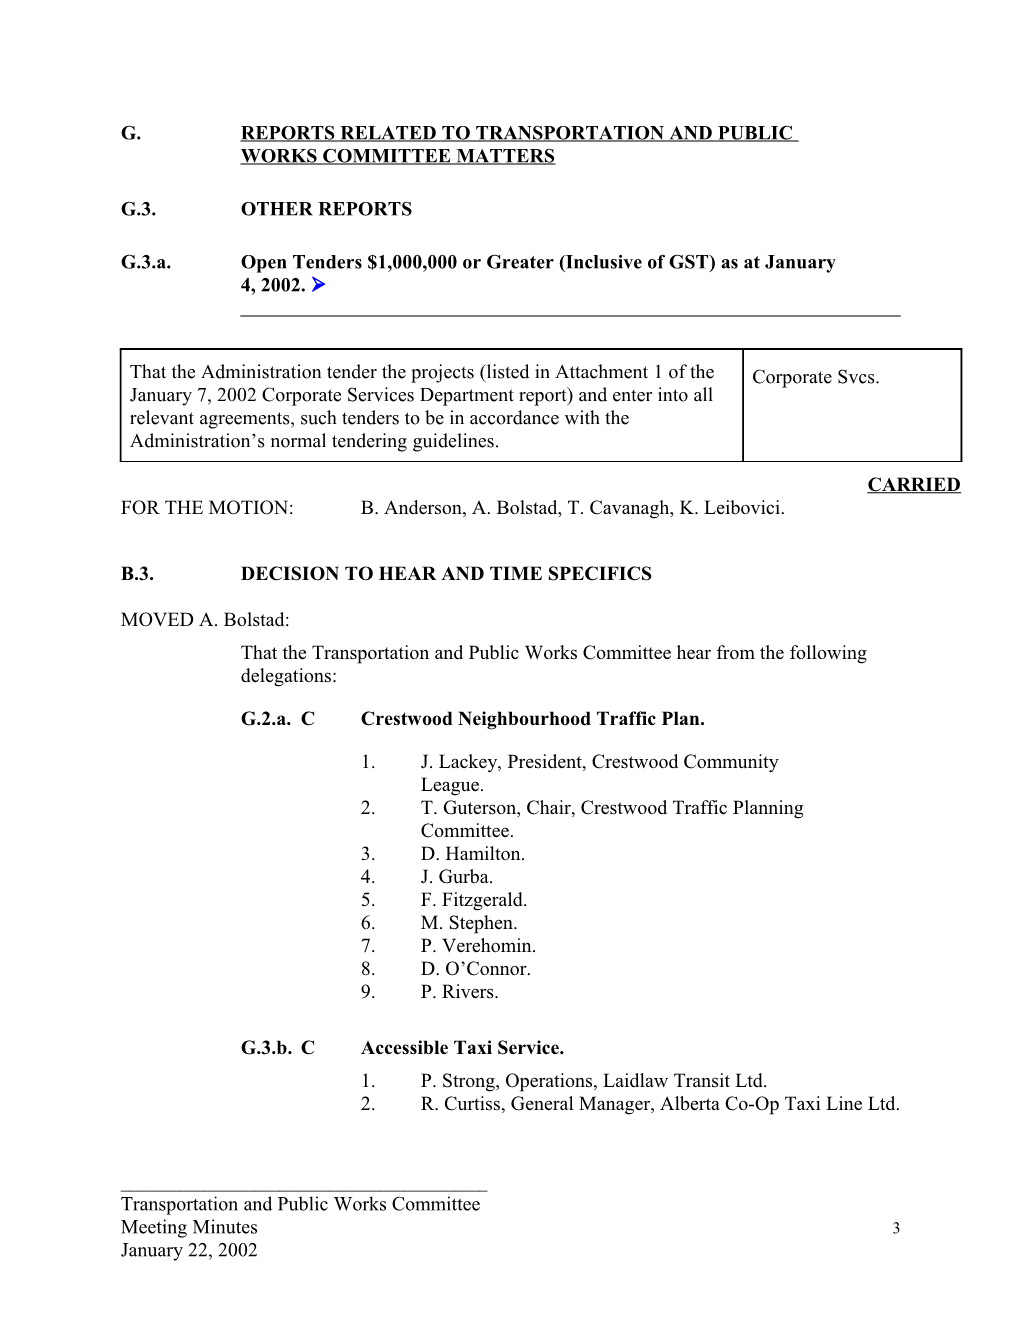 Minutes for Transportation and Public Works Committee January 22, 2002 Meeting